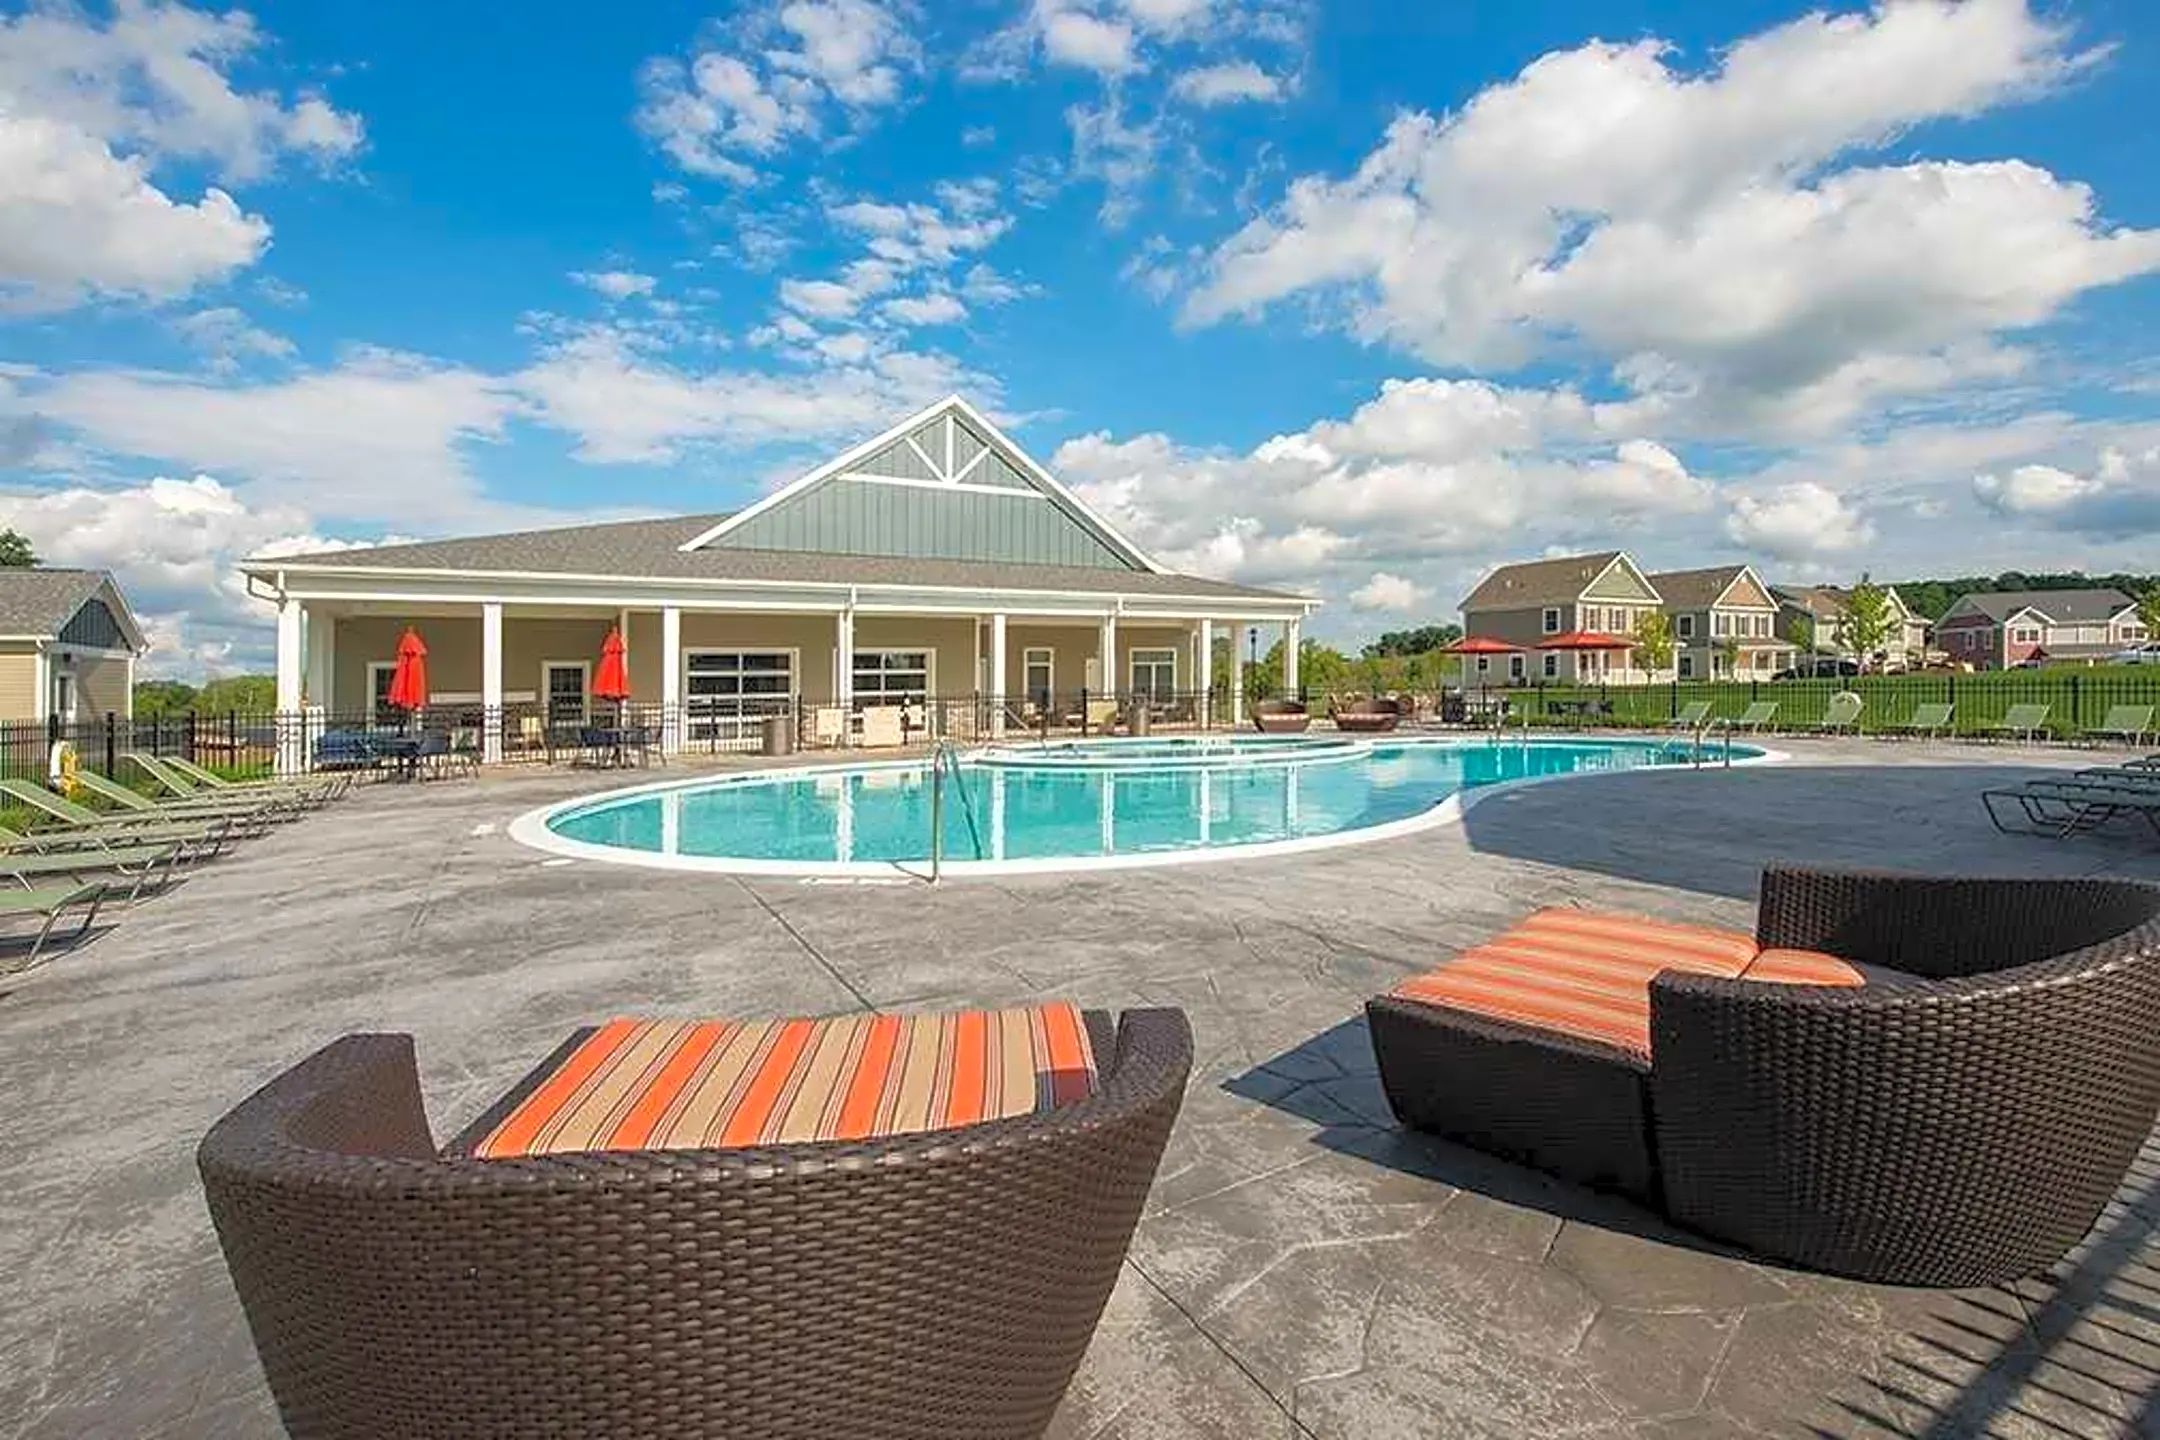 Pool - The Lodge Student Housing - West Henrietta, NY